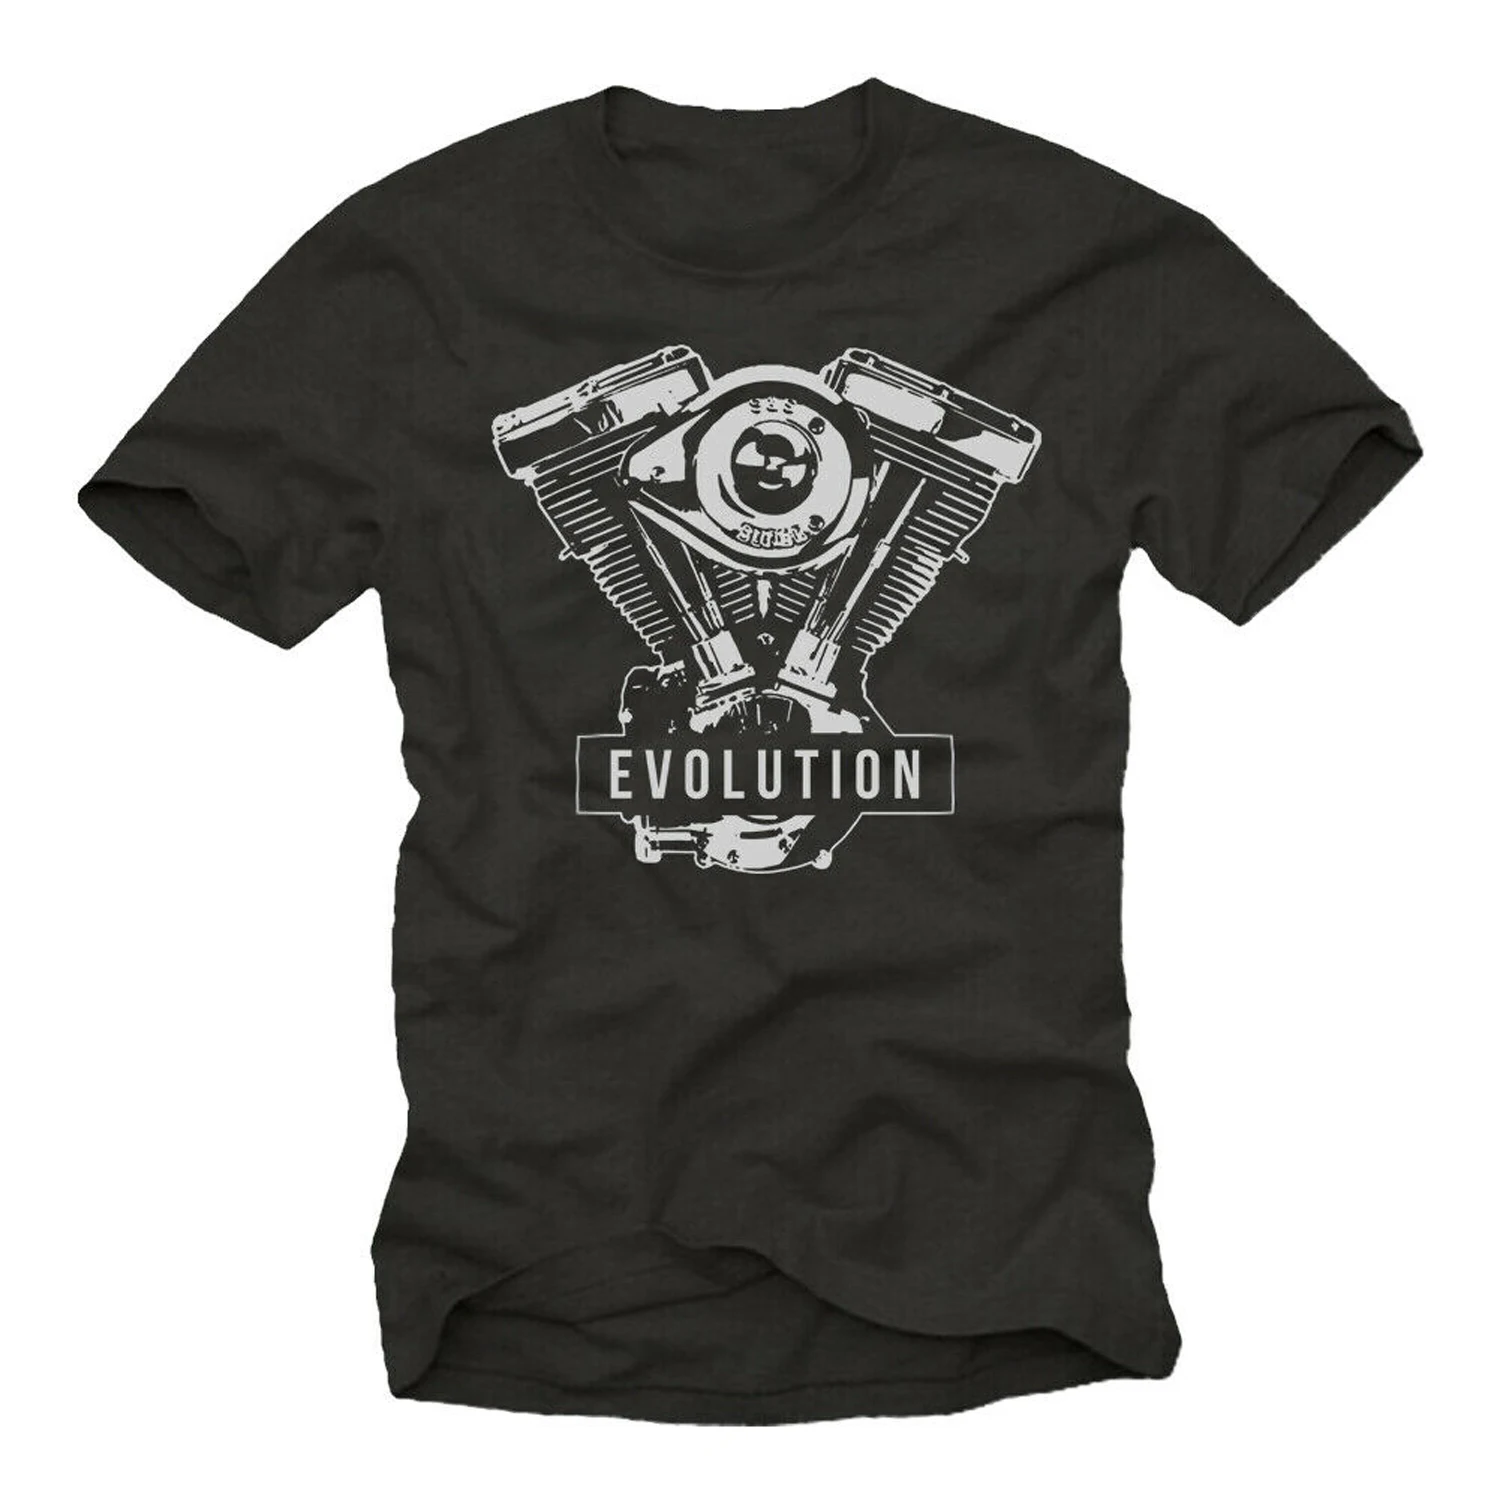 

V2 Evolution Engine. Rocker Biker Motorcycle Gifts T Shirt. Short Sleeve 100% Cotton Casual T-shirts Loose Top Size S-3XL